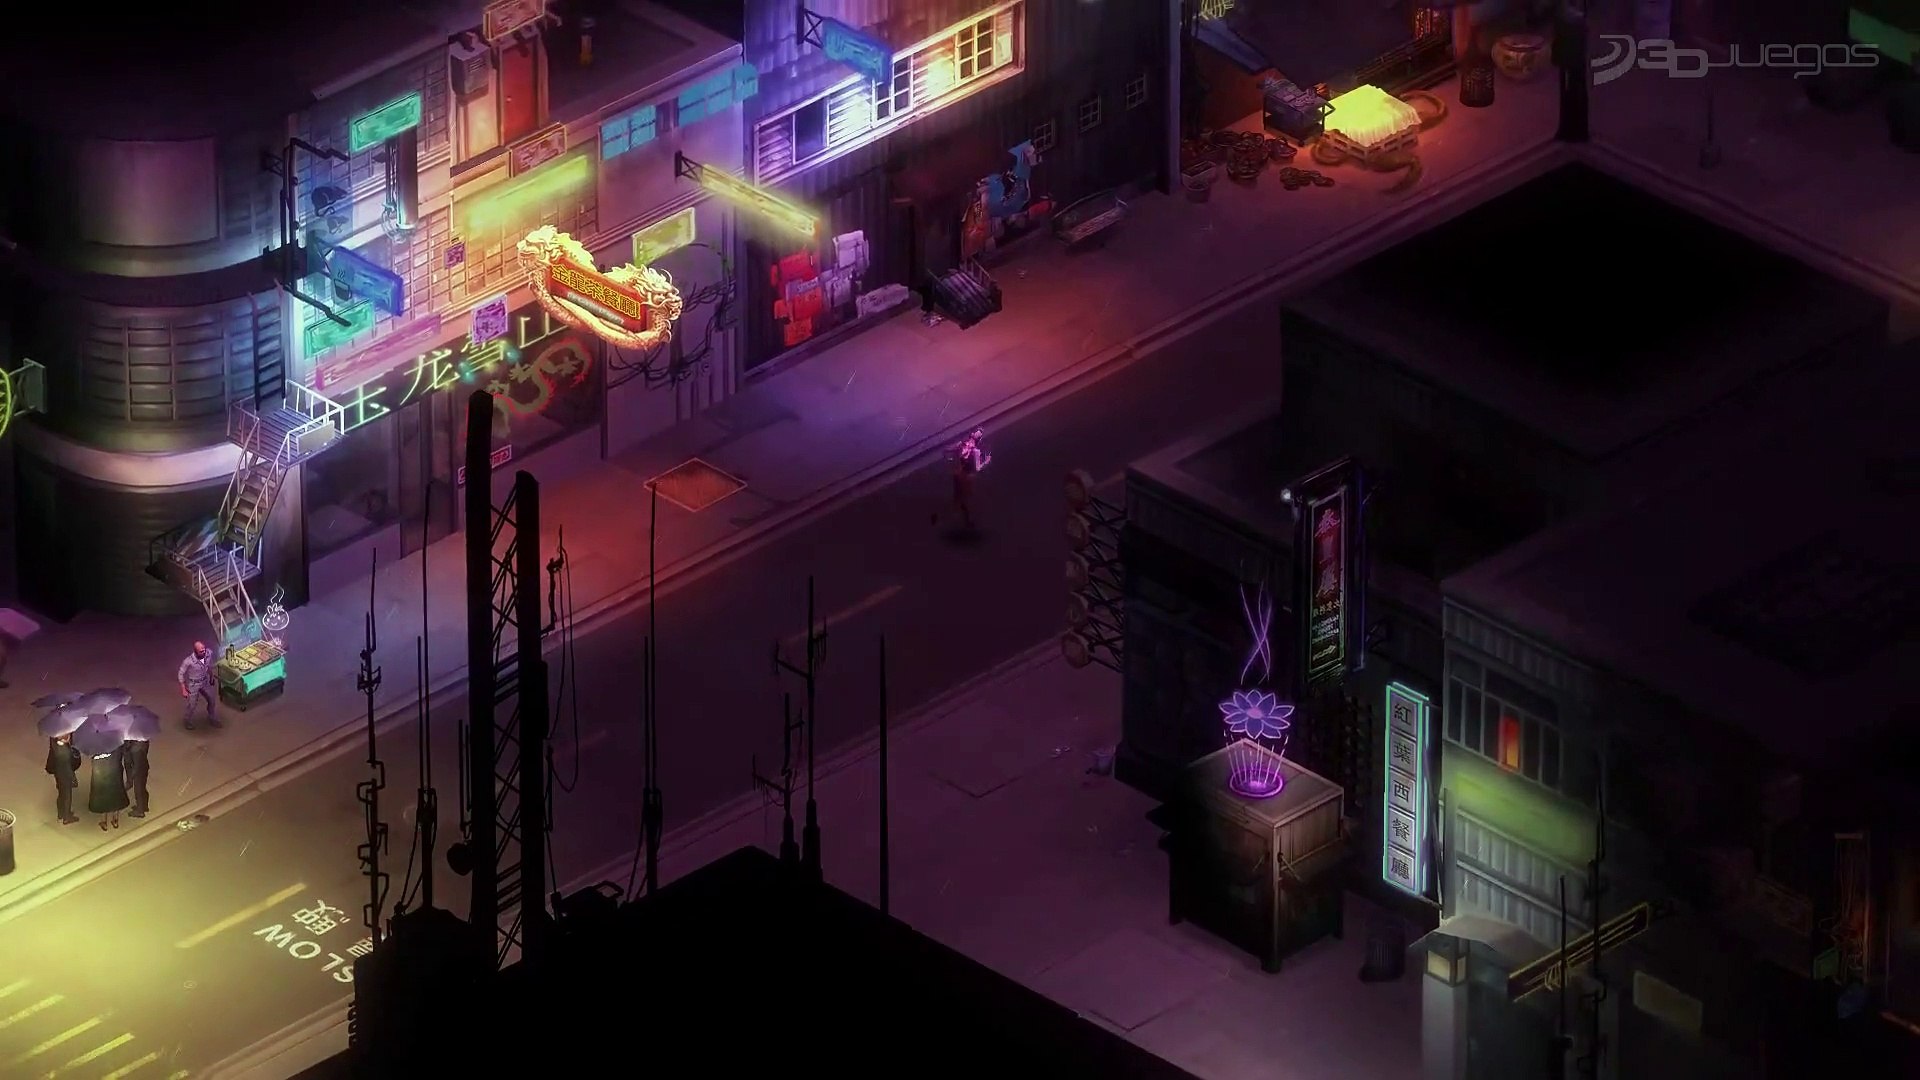 Shadowrun: Hong Kong - Extended Edition launch trailer - video Dailymotion